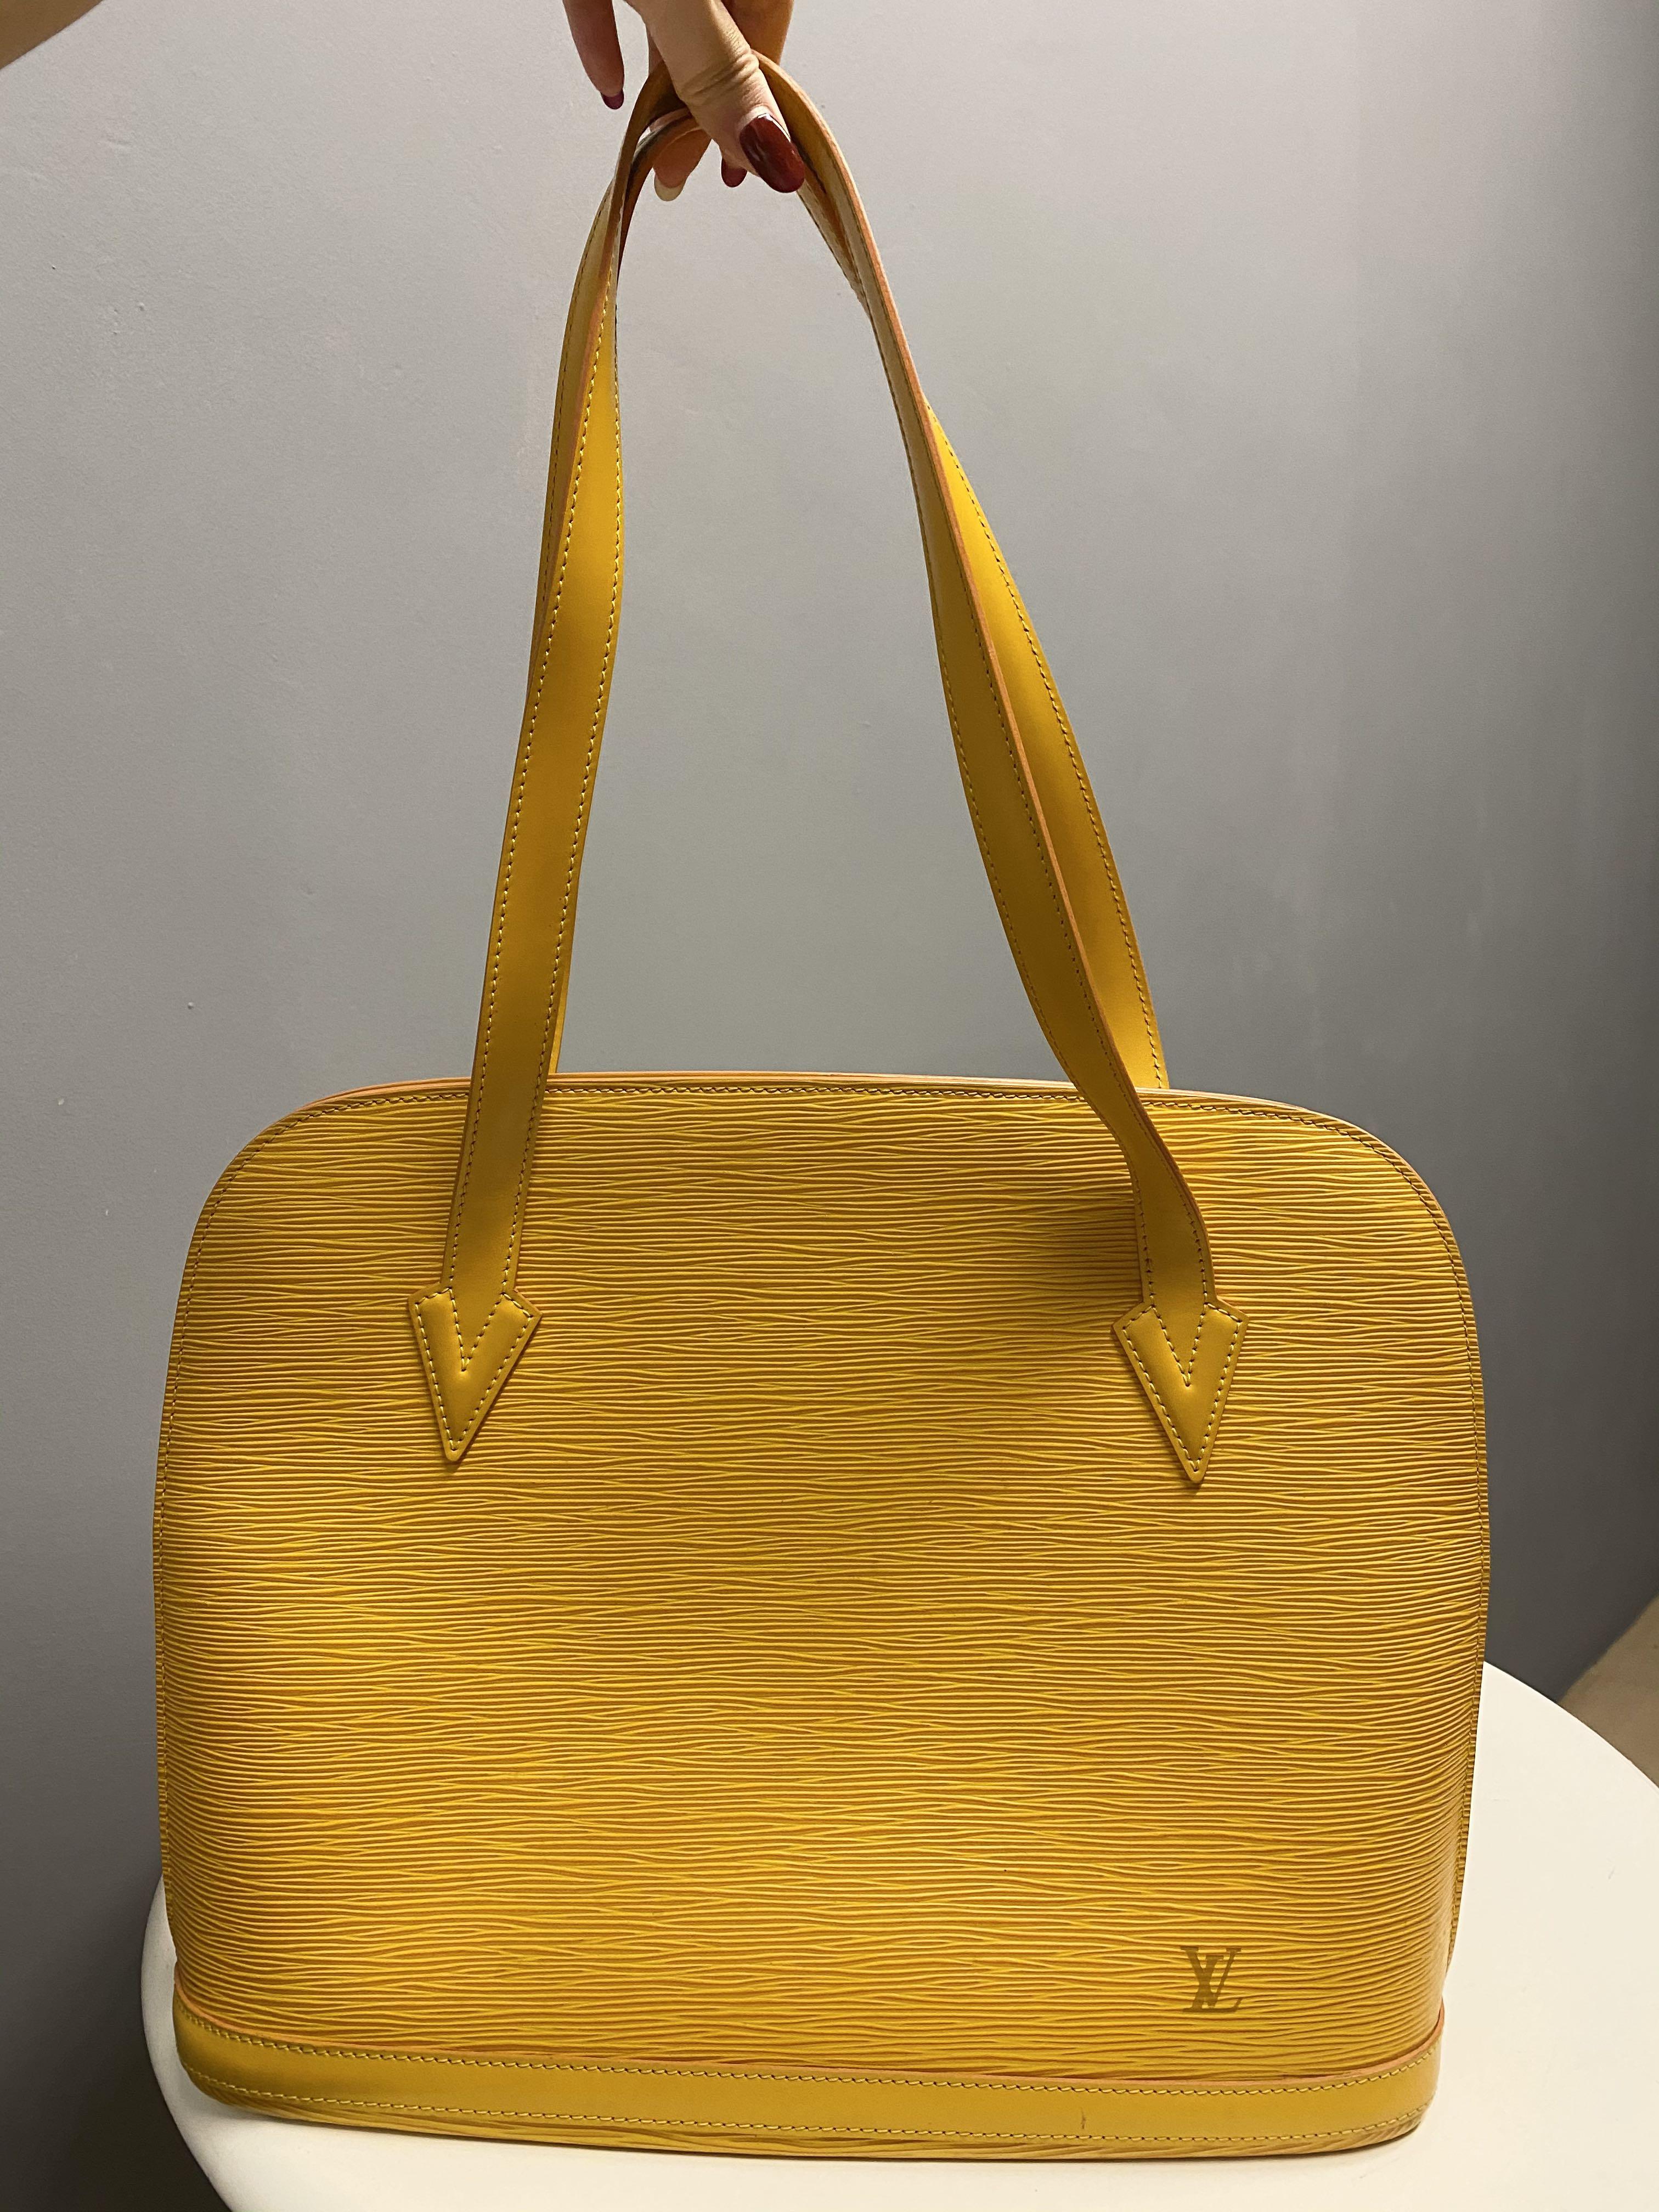 Authentic Louis Vuitton Lussac Tote in Epi Leather, Luxury, Bags